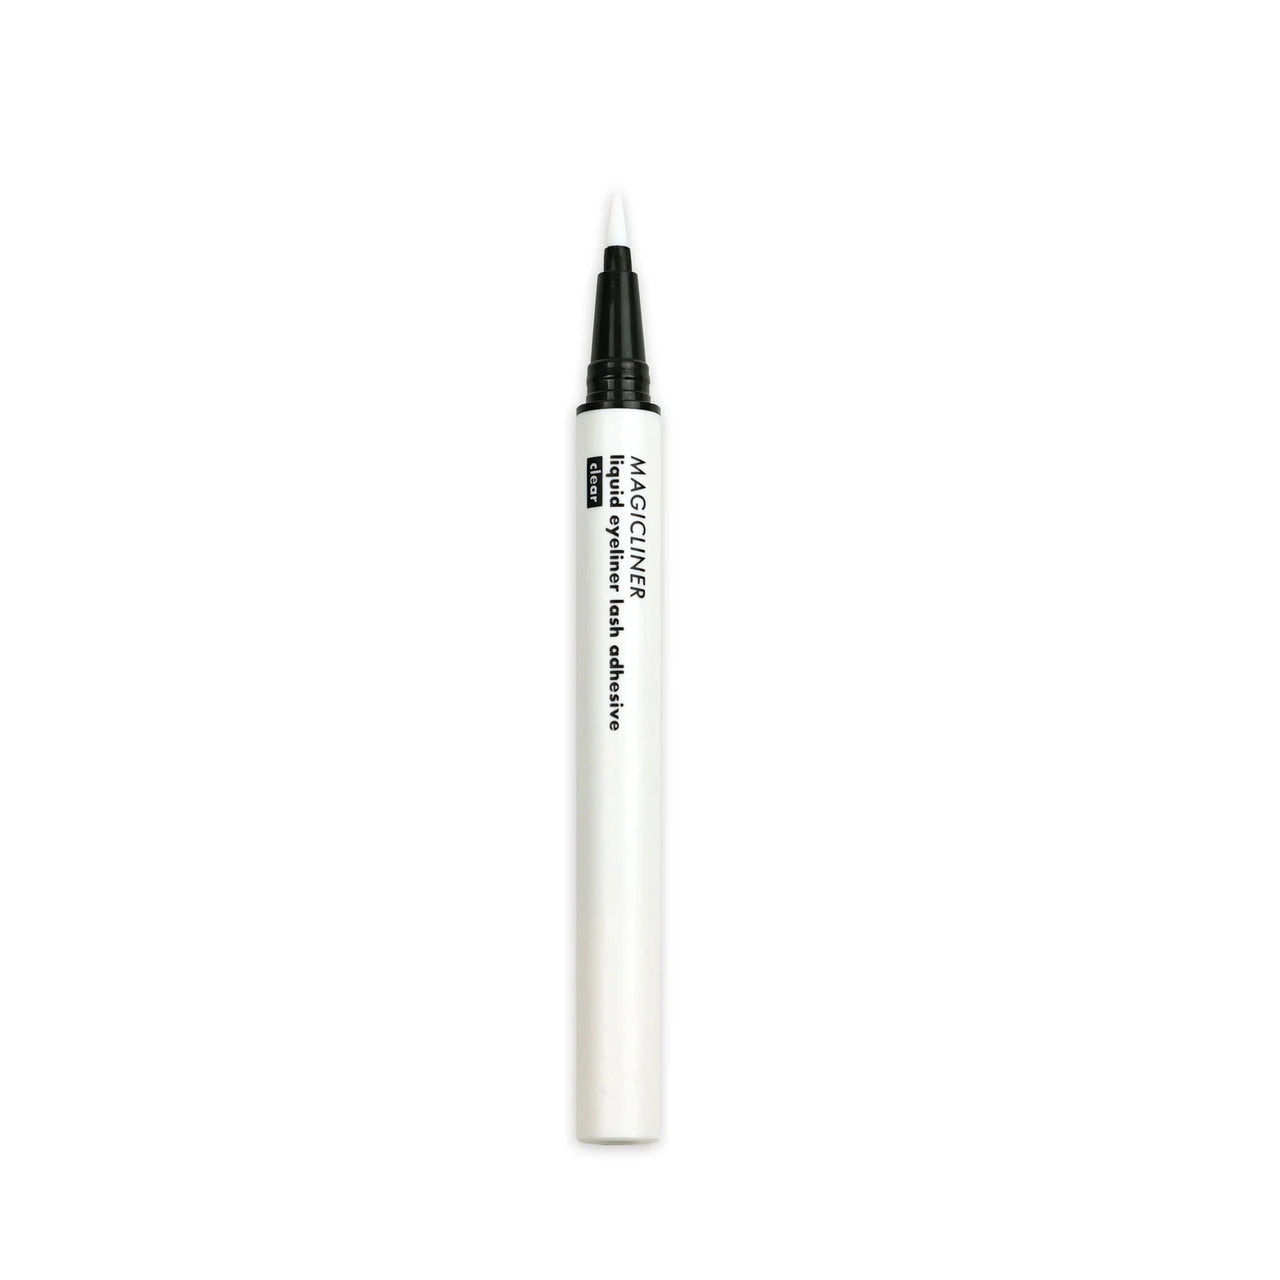 KR-A099 Magicliner 2 in 1 Liquid Eyeliner & Lash Adhesive 'Clear' : 6 PC